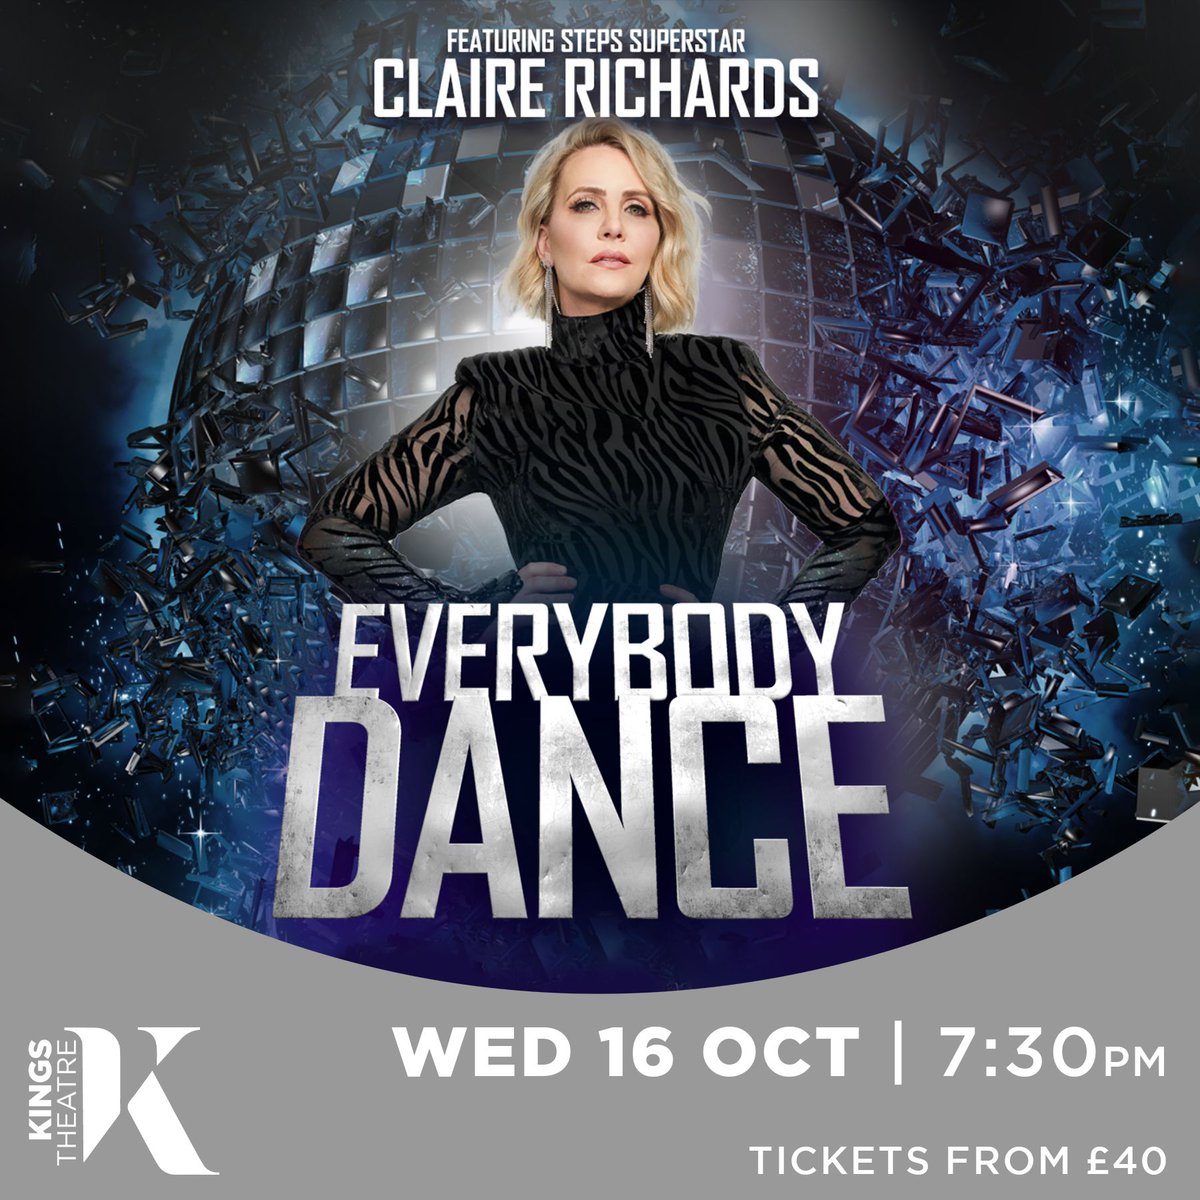 ✨NEW SHOW ON SALE!✨ Join Steps superstar, Claire Richards for the ultimate disco party, EVERYBODY DANCE! It’s time to put on your sequins and experience a night of glamour, sensational vocals, and powerhouse hits! 📅 Wed 16 Oct 🎟️ Tickets from £40 ➡️ buff.ly/4aVWyin